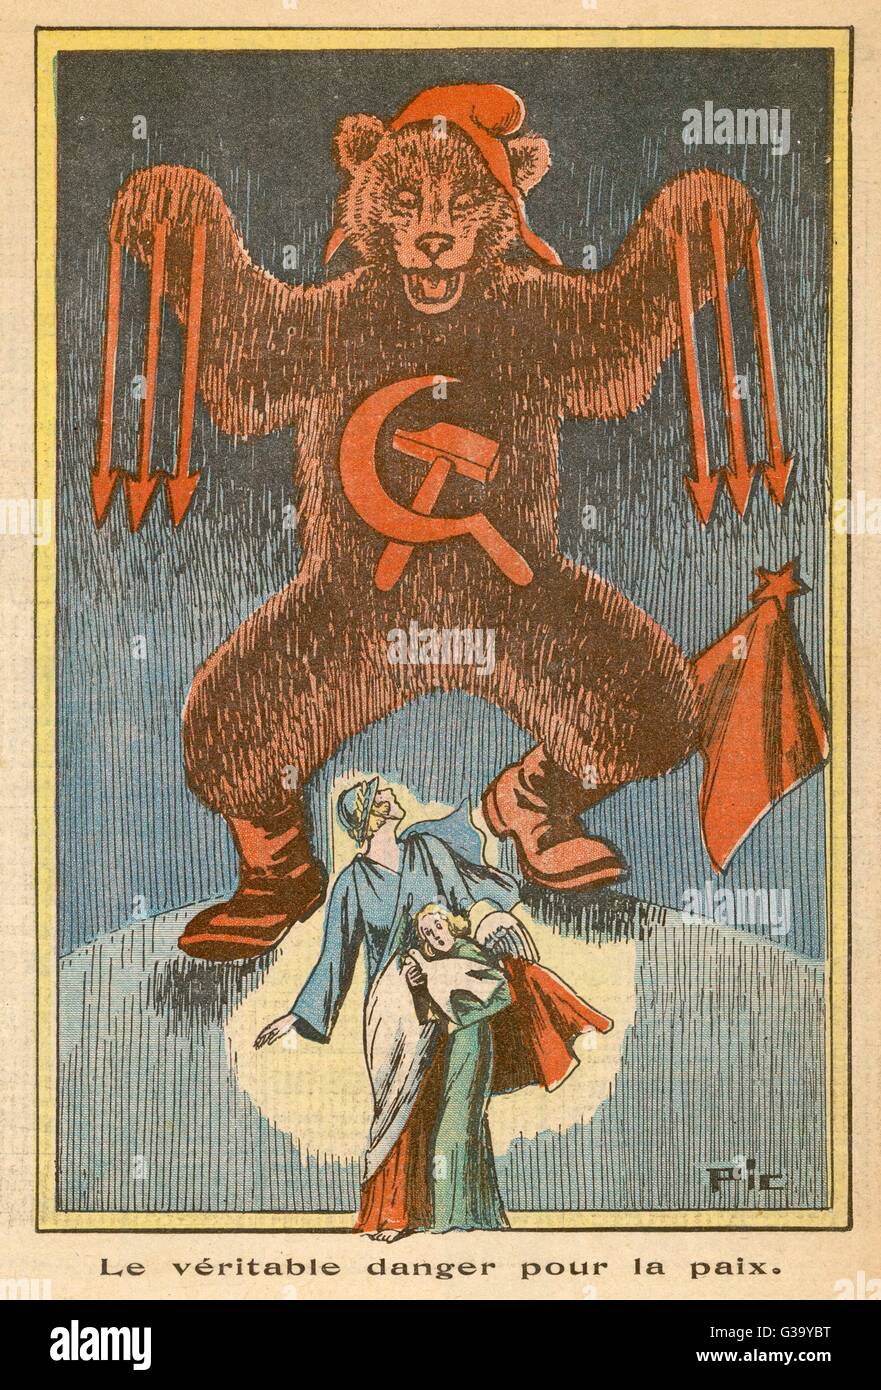 Soviet communism - the real  threat to peace (from the  point of view of a right-wing  Catholic journal)       Date: 1935 Stock Photo